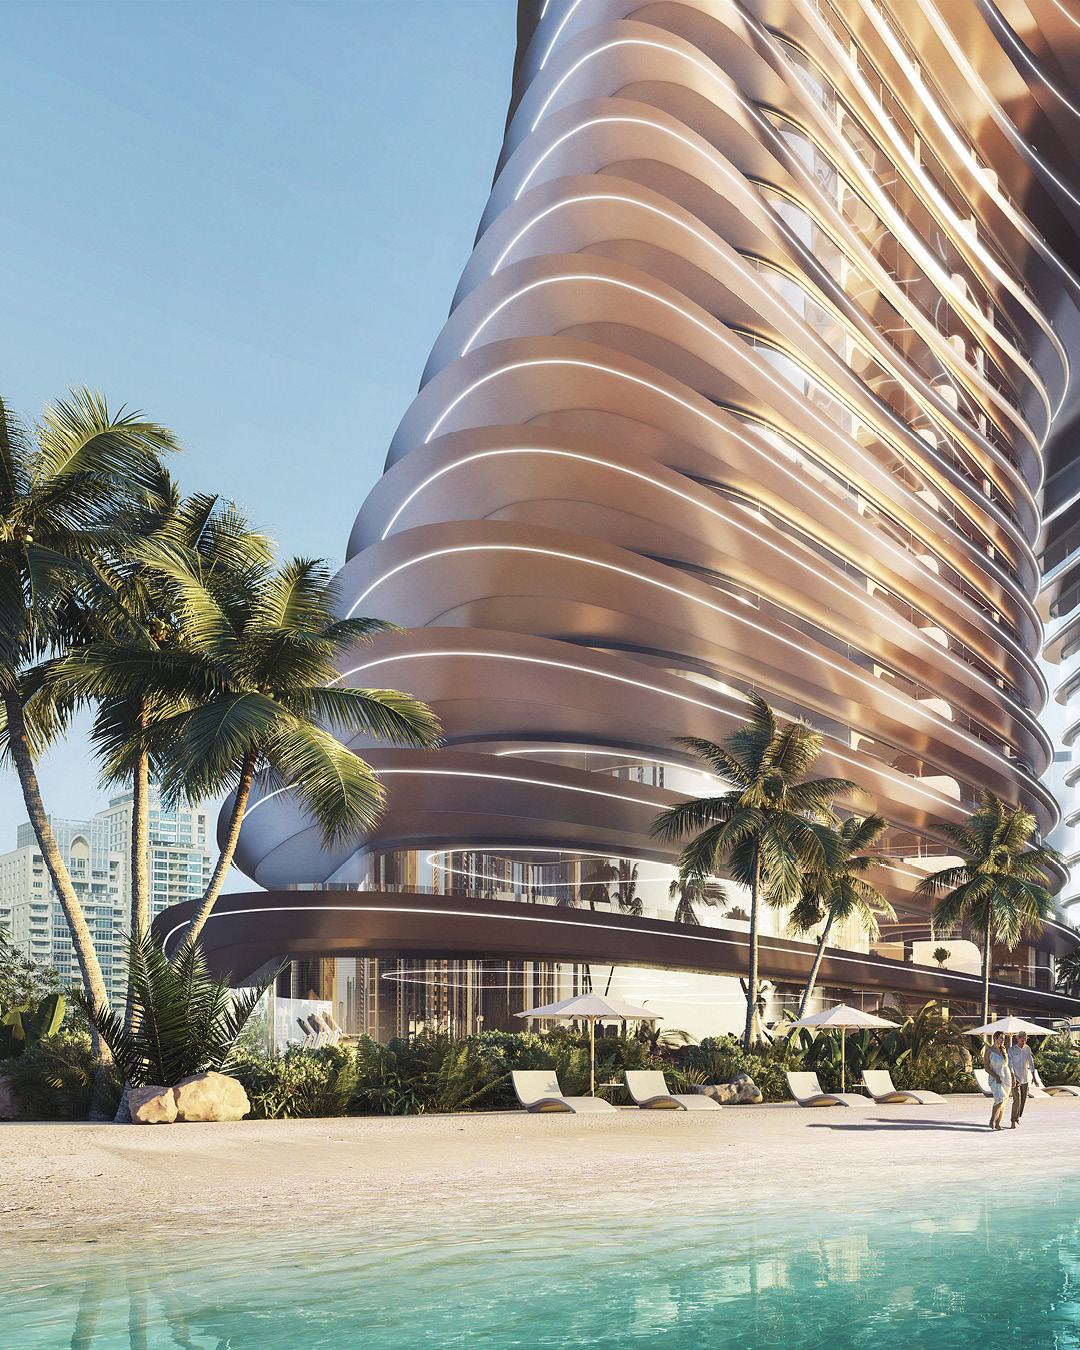 More renderings depicting the development's Riviera-inspired beach.